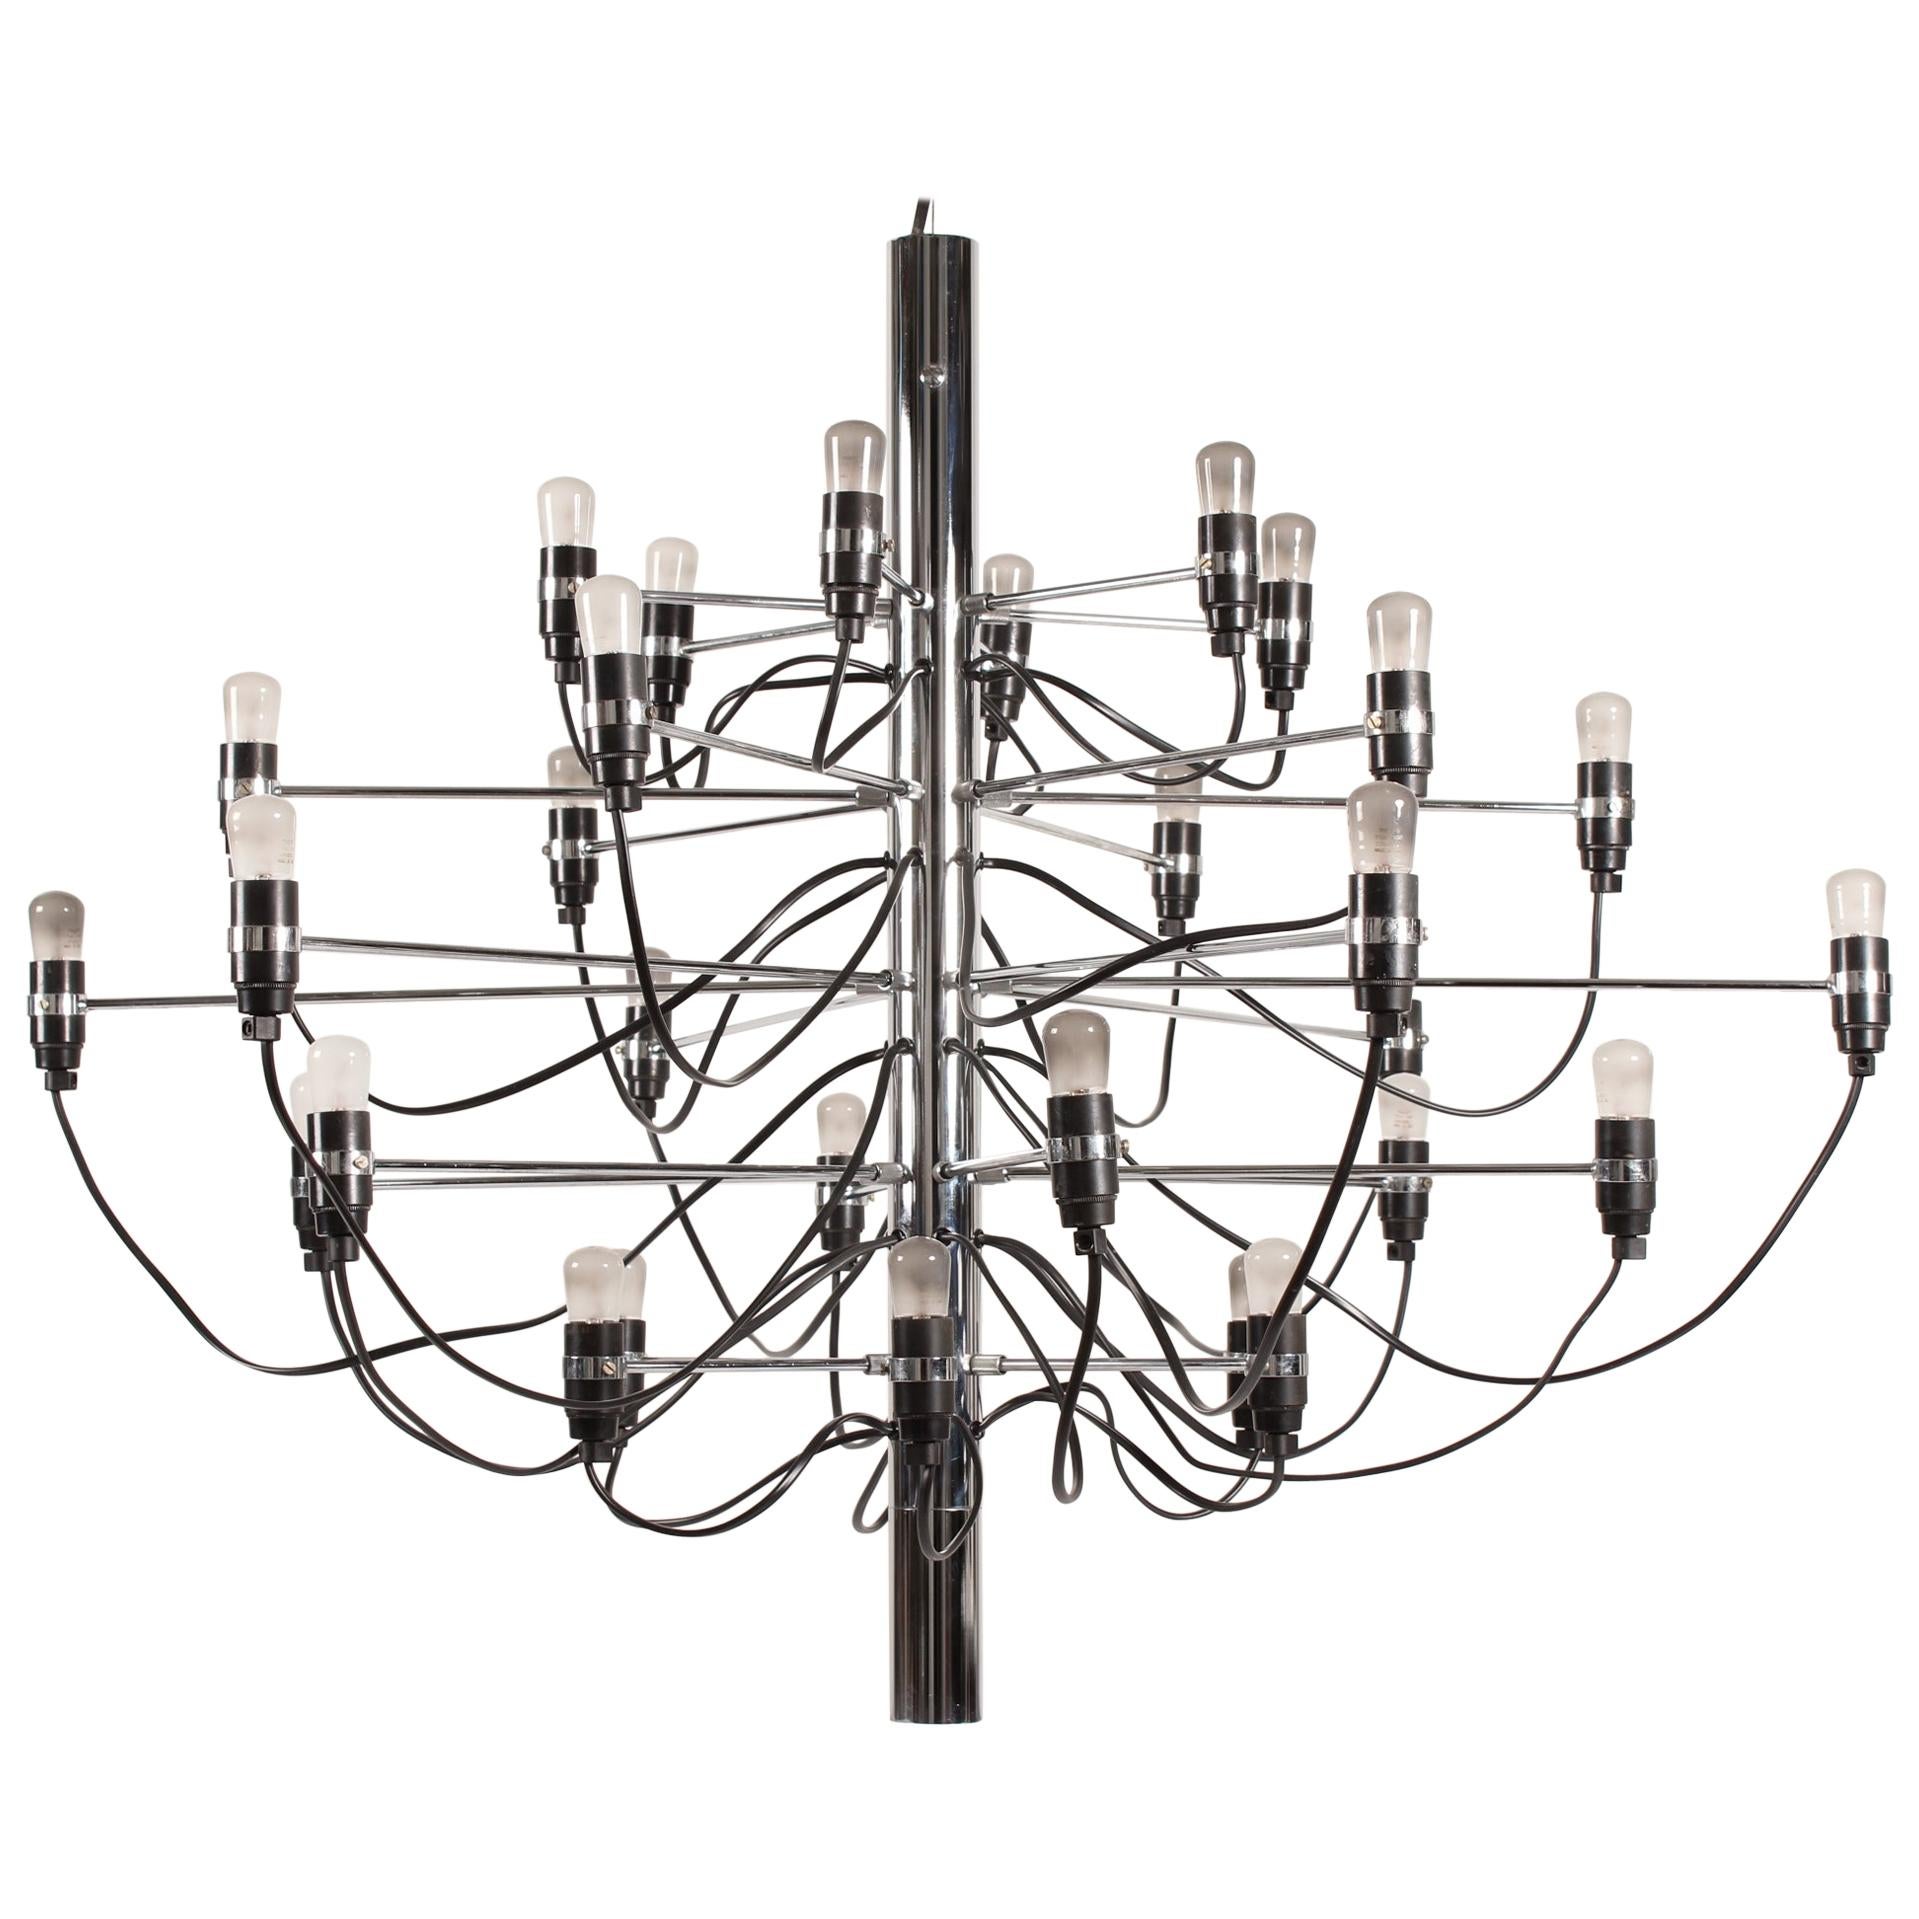 Vintage Gino Sarfatti 30 Armed Chrome Chandelier Model 2097 Made by Flos, 1980s